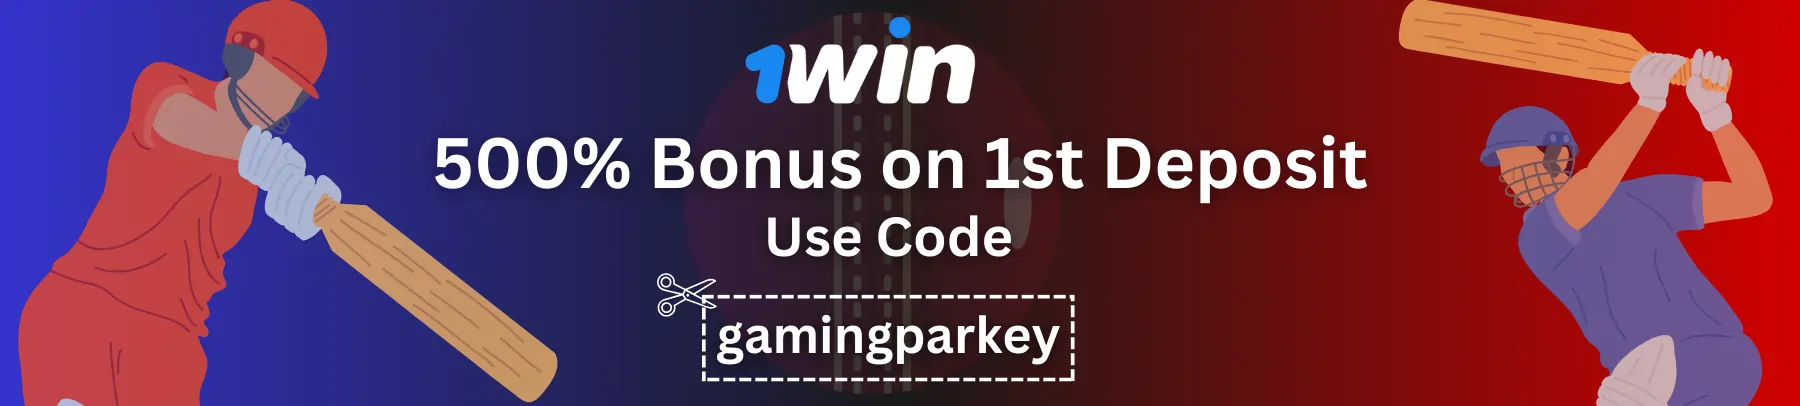 1Win coupon Review